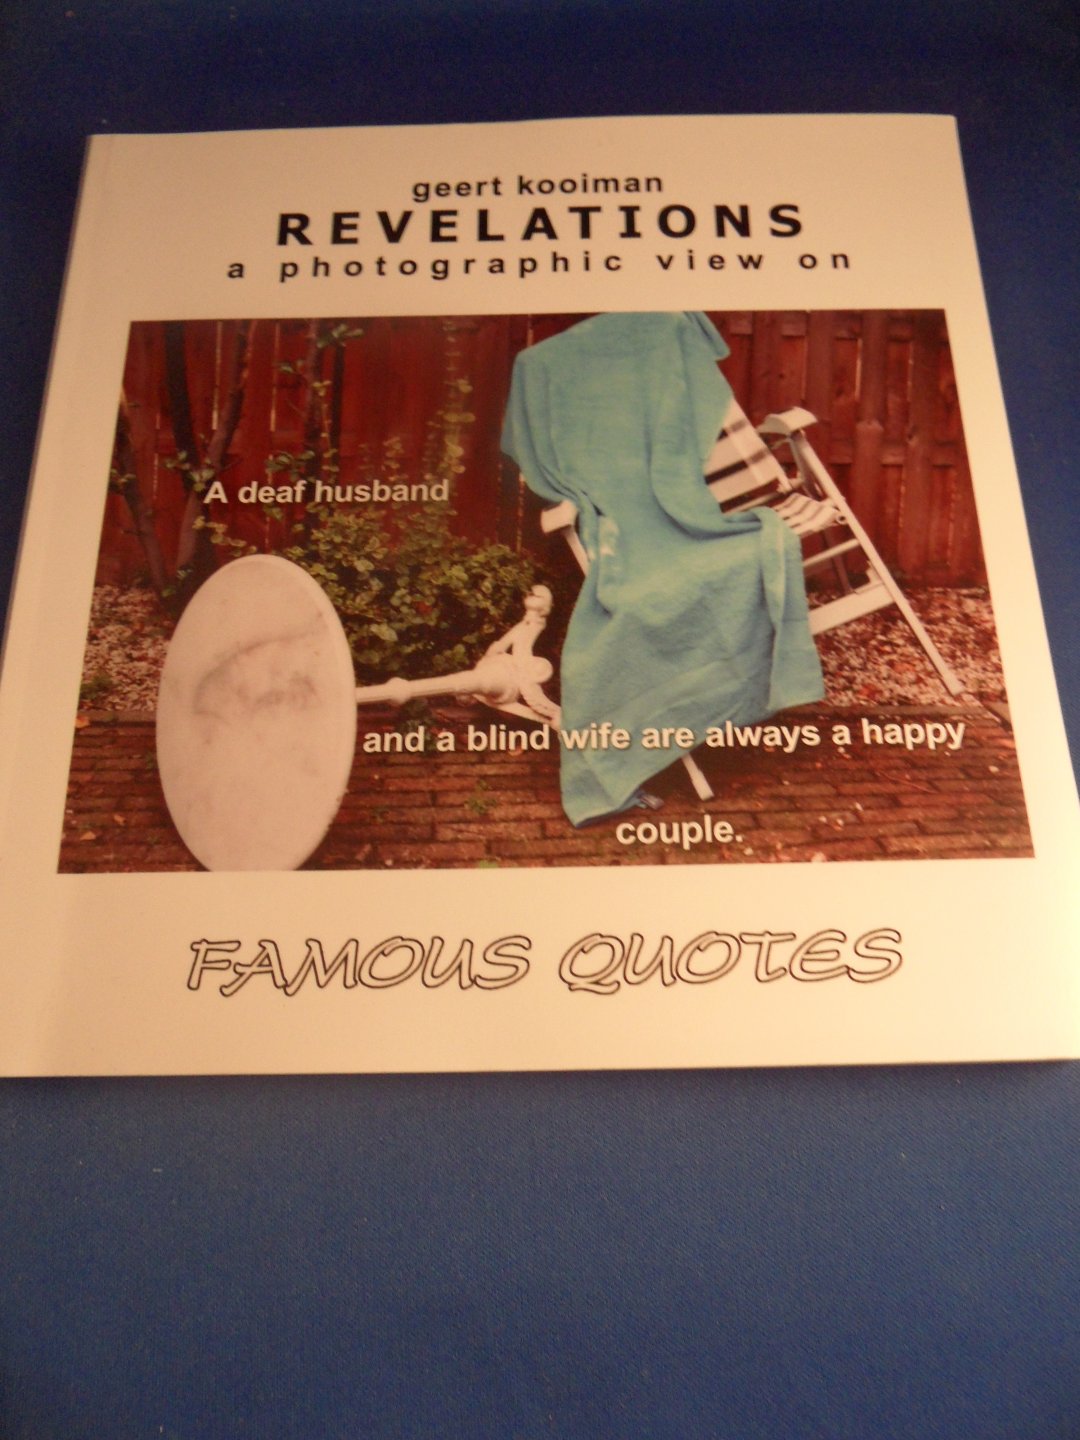 Kooiman, Geert - Revelations. A photographic view on A deaf husband and a blind wife are always a happy couple